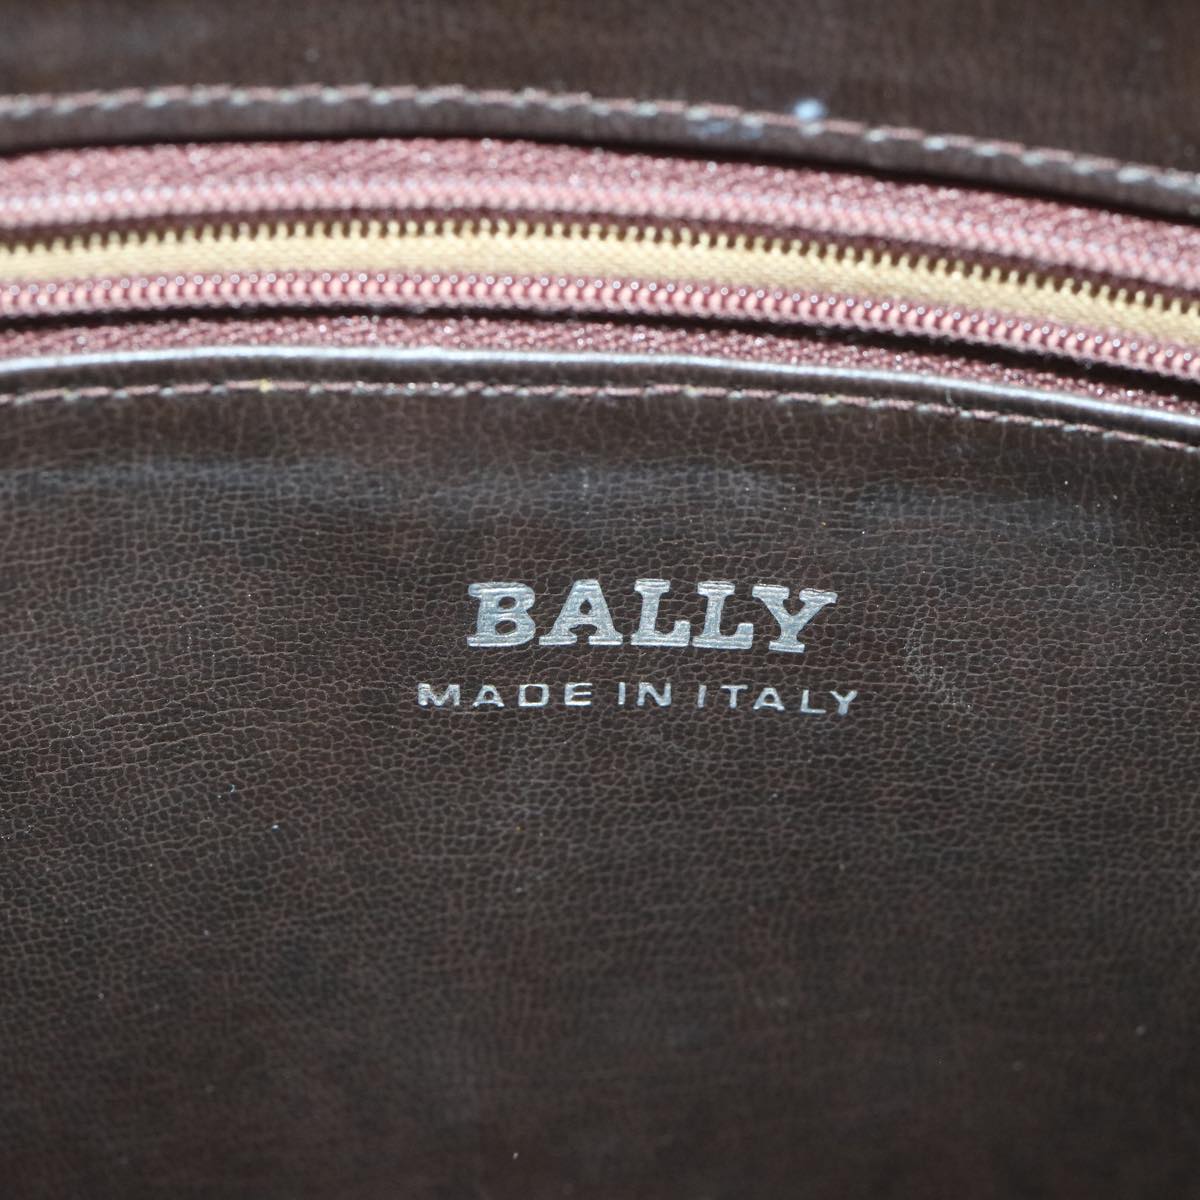 BALLY Hand Bag Leather Brown Auth bs10774